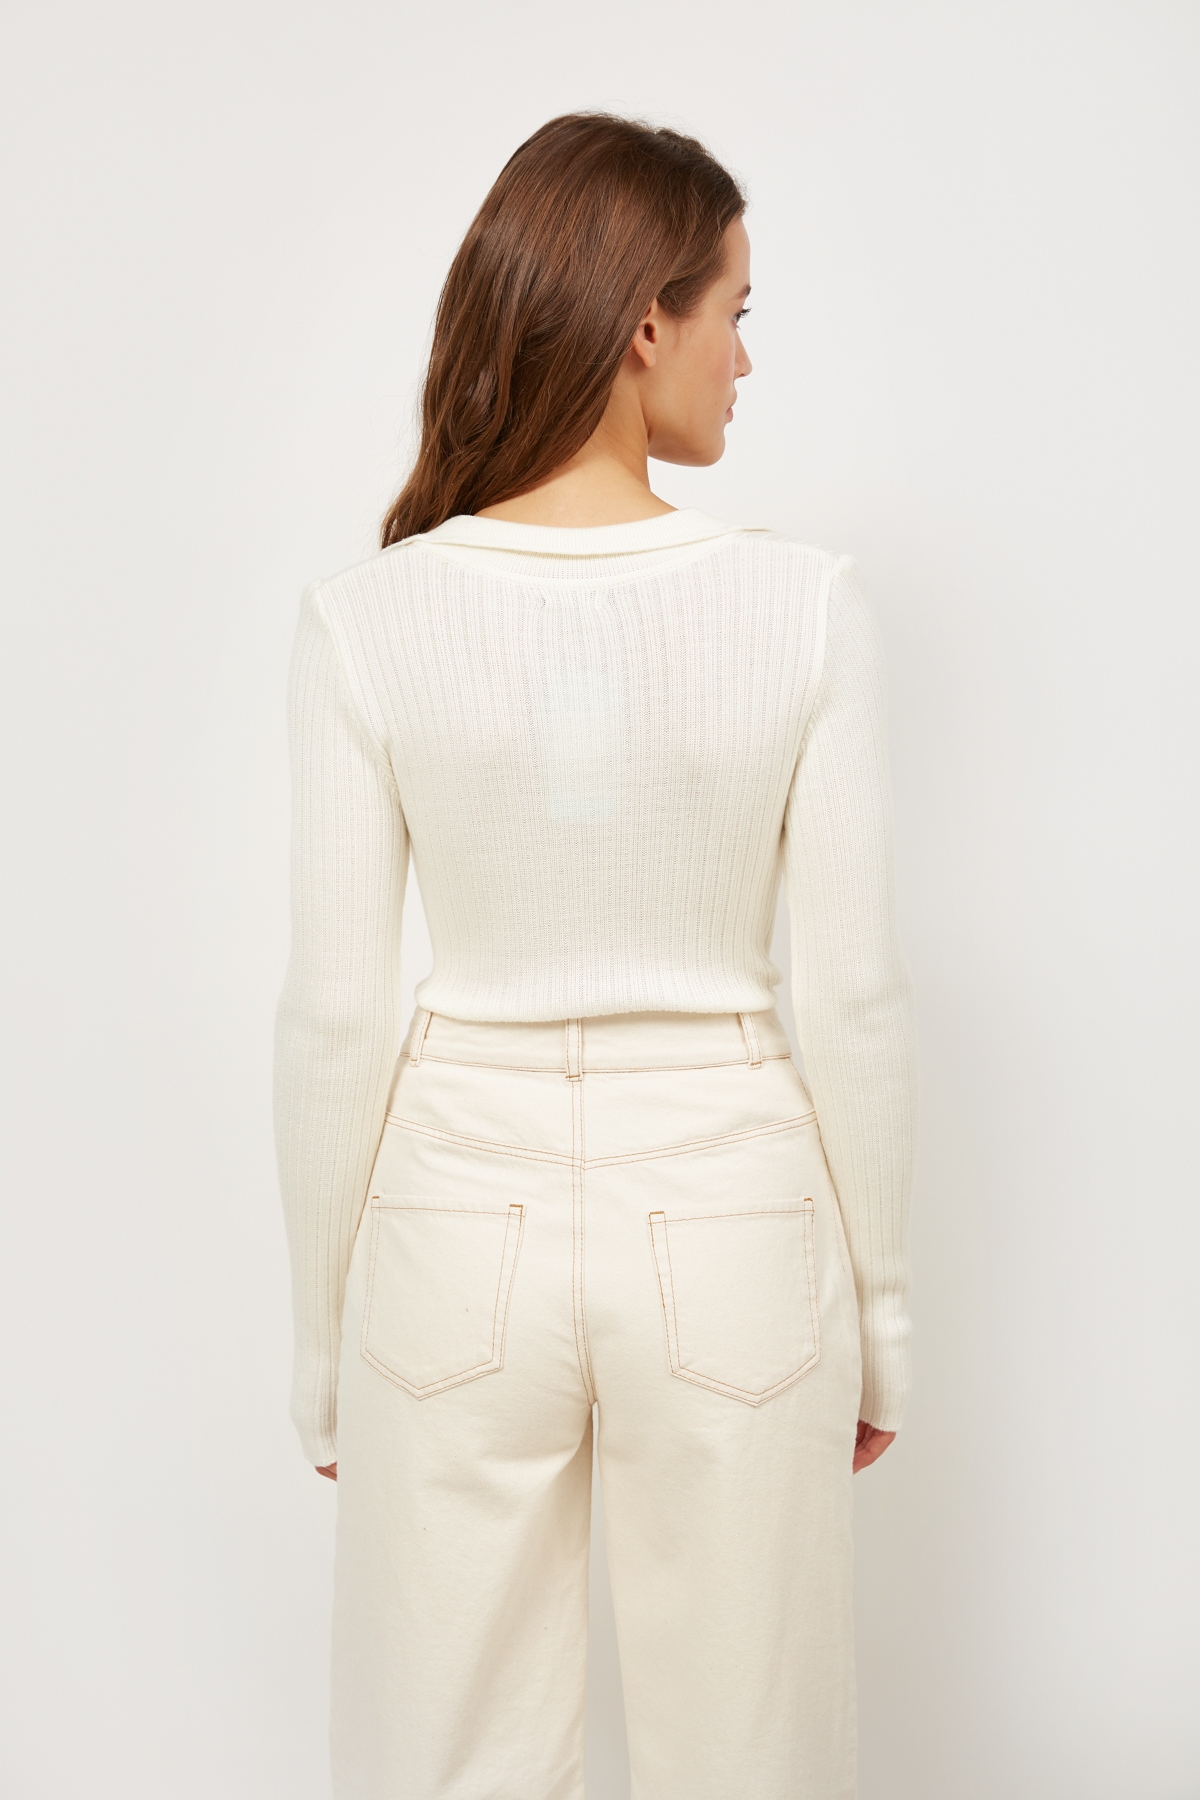 White jumper with a collar, photo 3